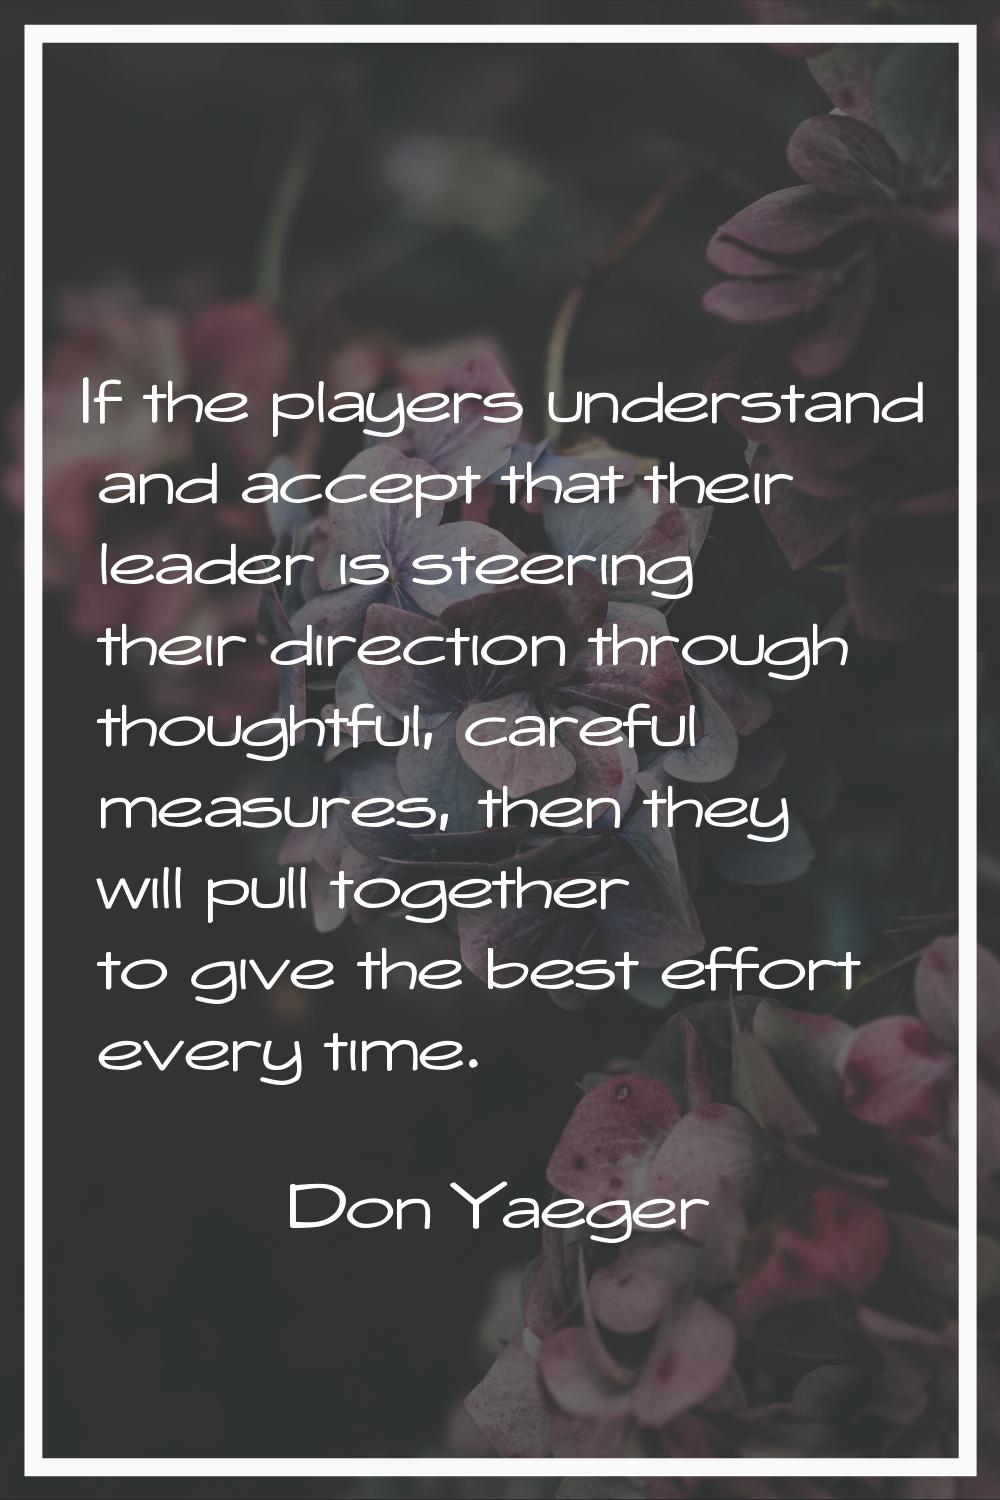 If the players understand and accept that their leader is steering their direction through thoughtf